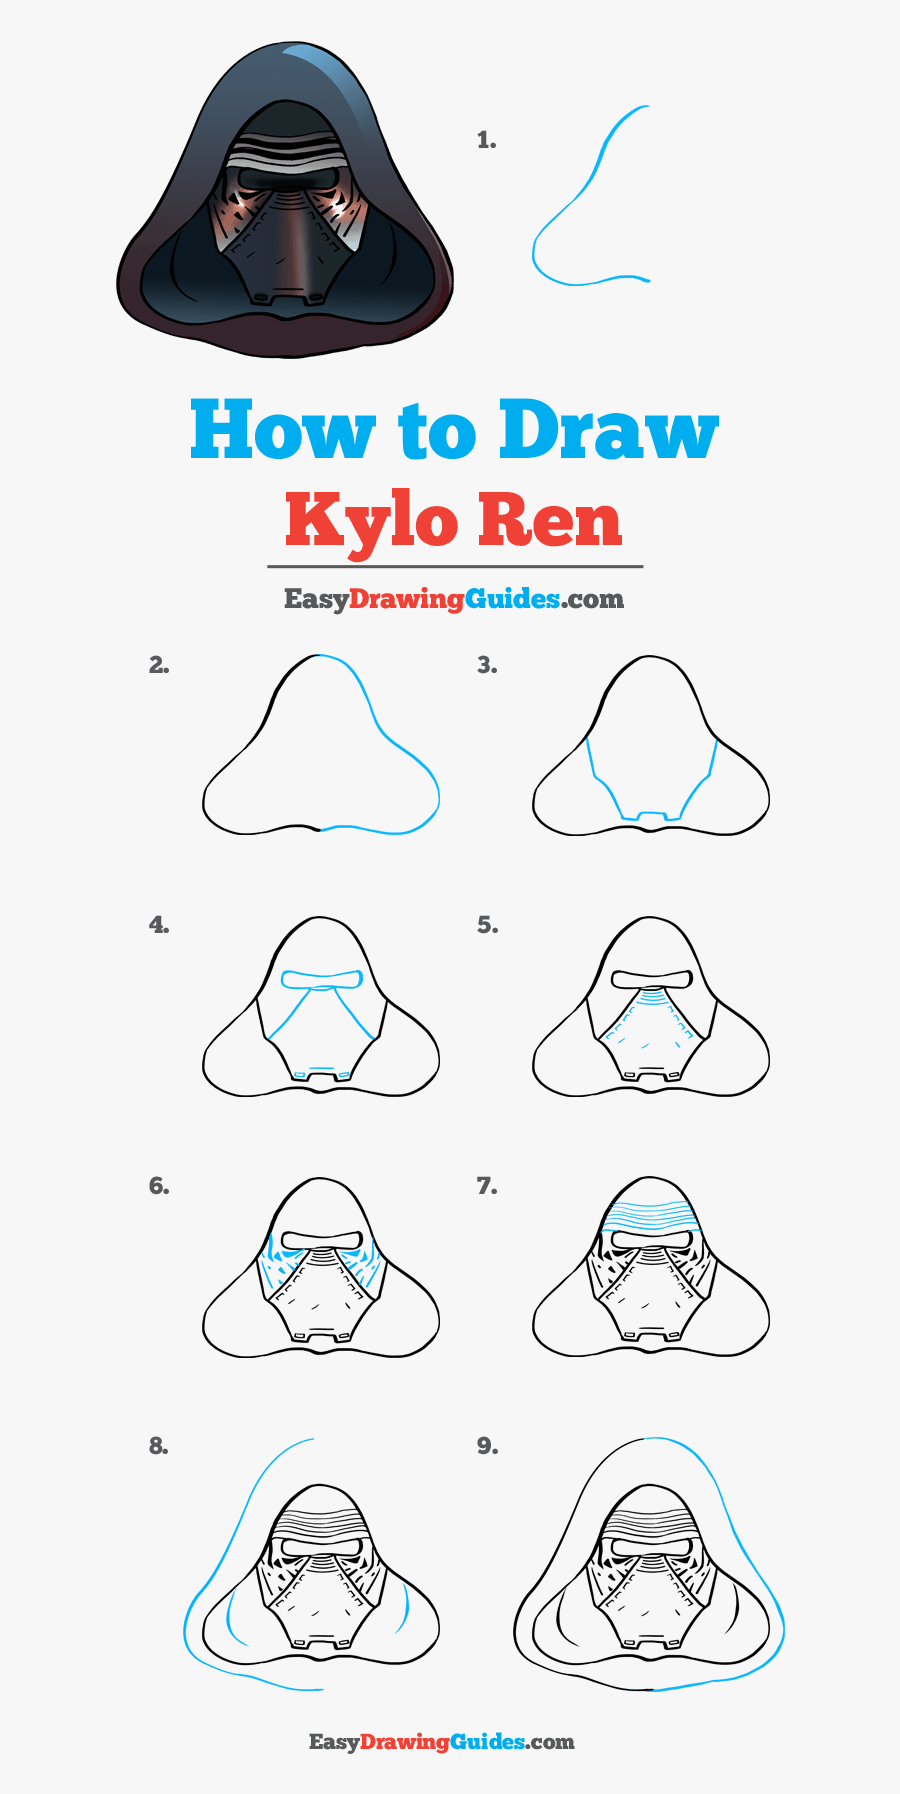 How To Draw Kylo Ren - Draw A Vampire Step By Step, Transparent Clipart